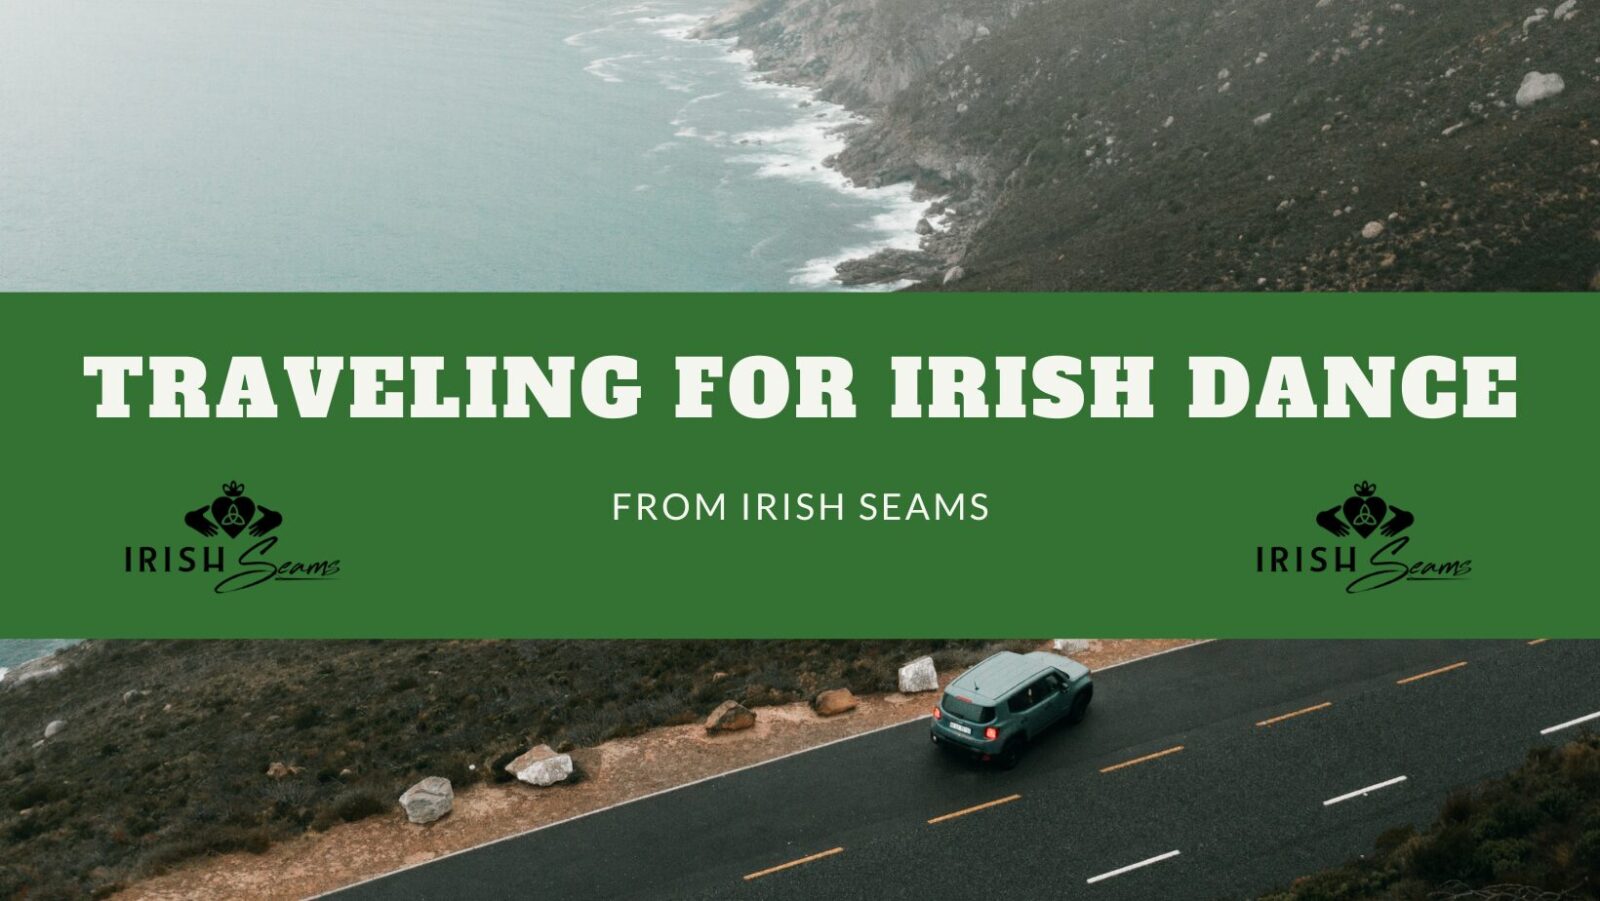 Banner depicting a car stopped on a highway and the words 'Traveling for Irish Dance from Irish Seams' for an article on saving money and effort while traveling